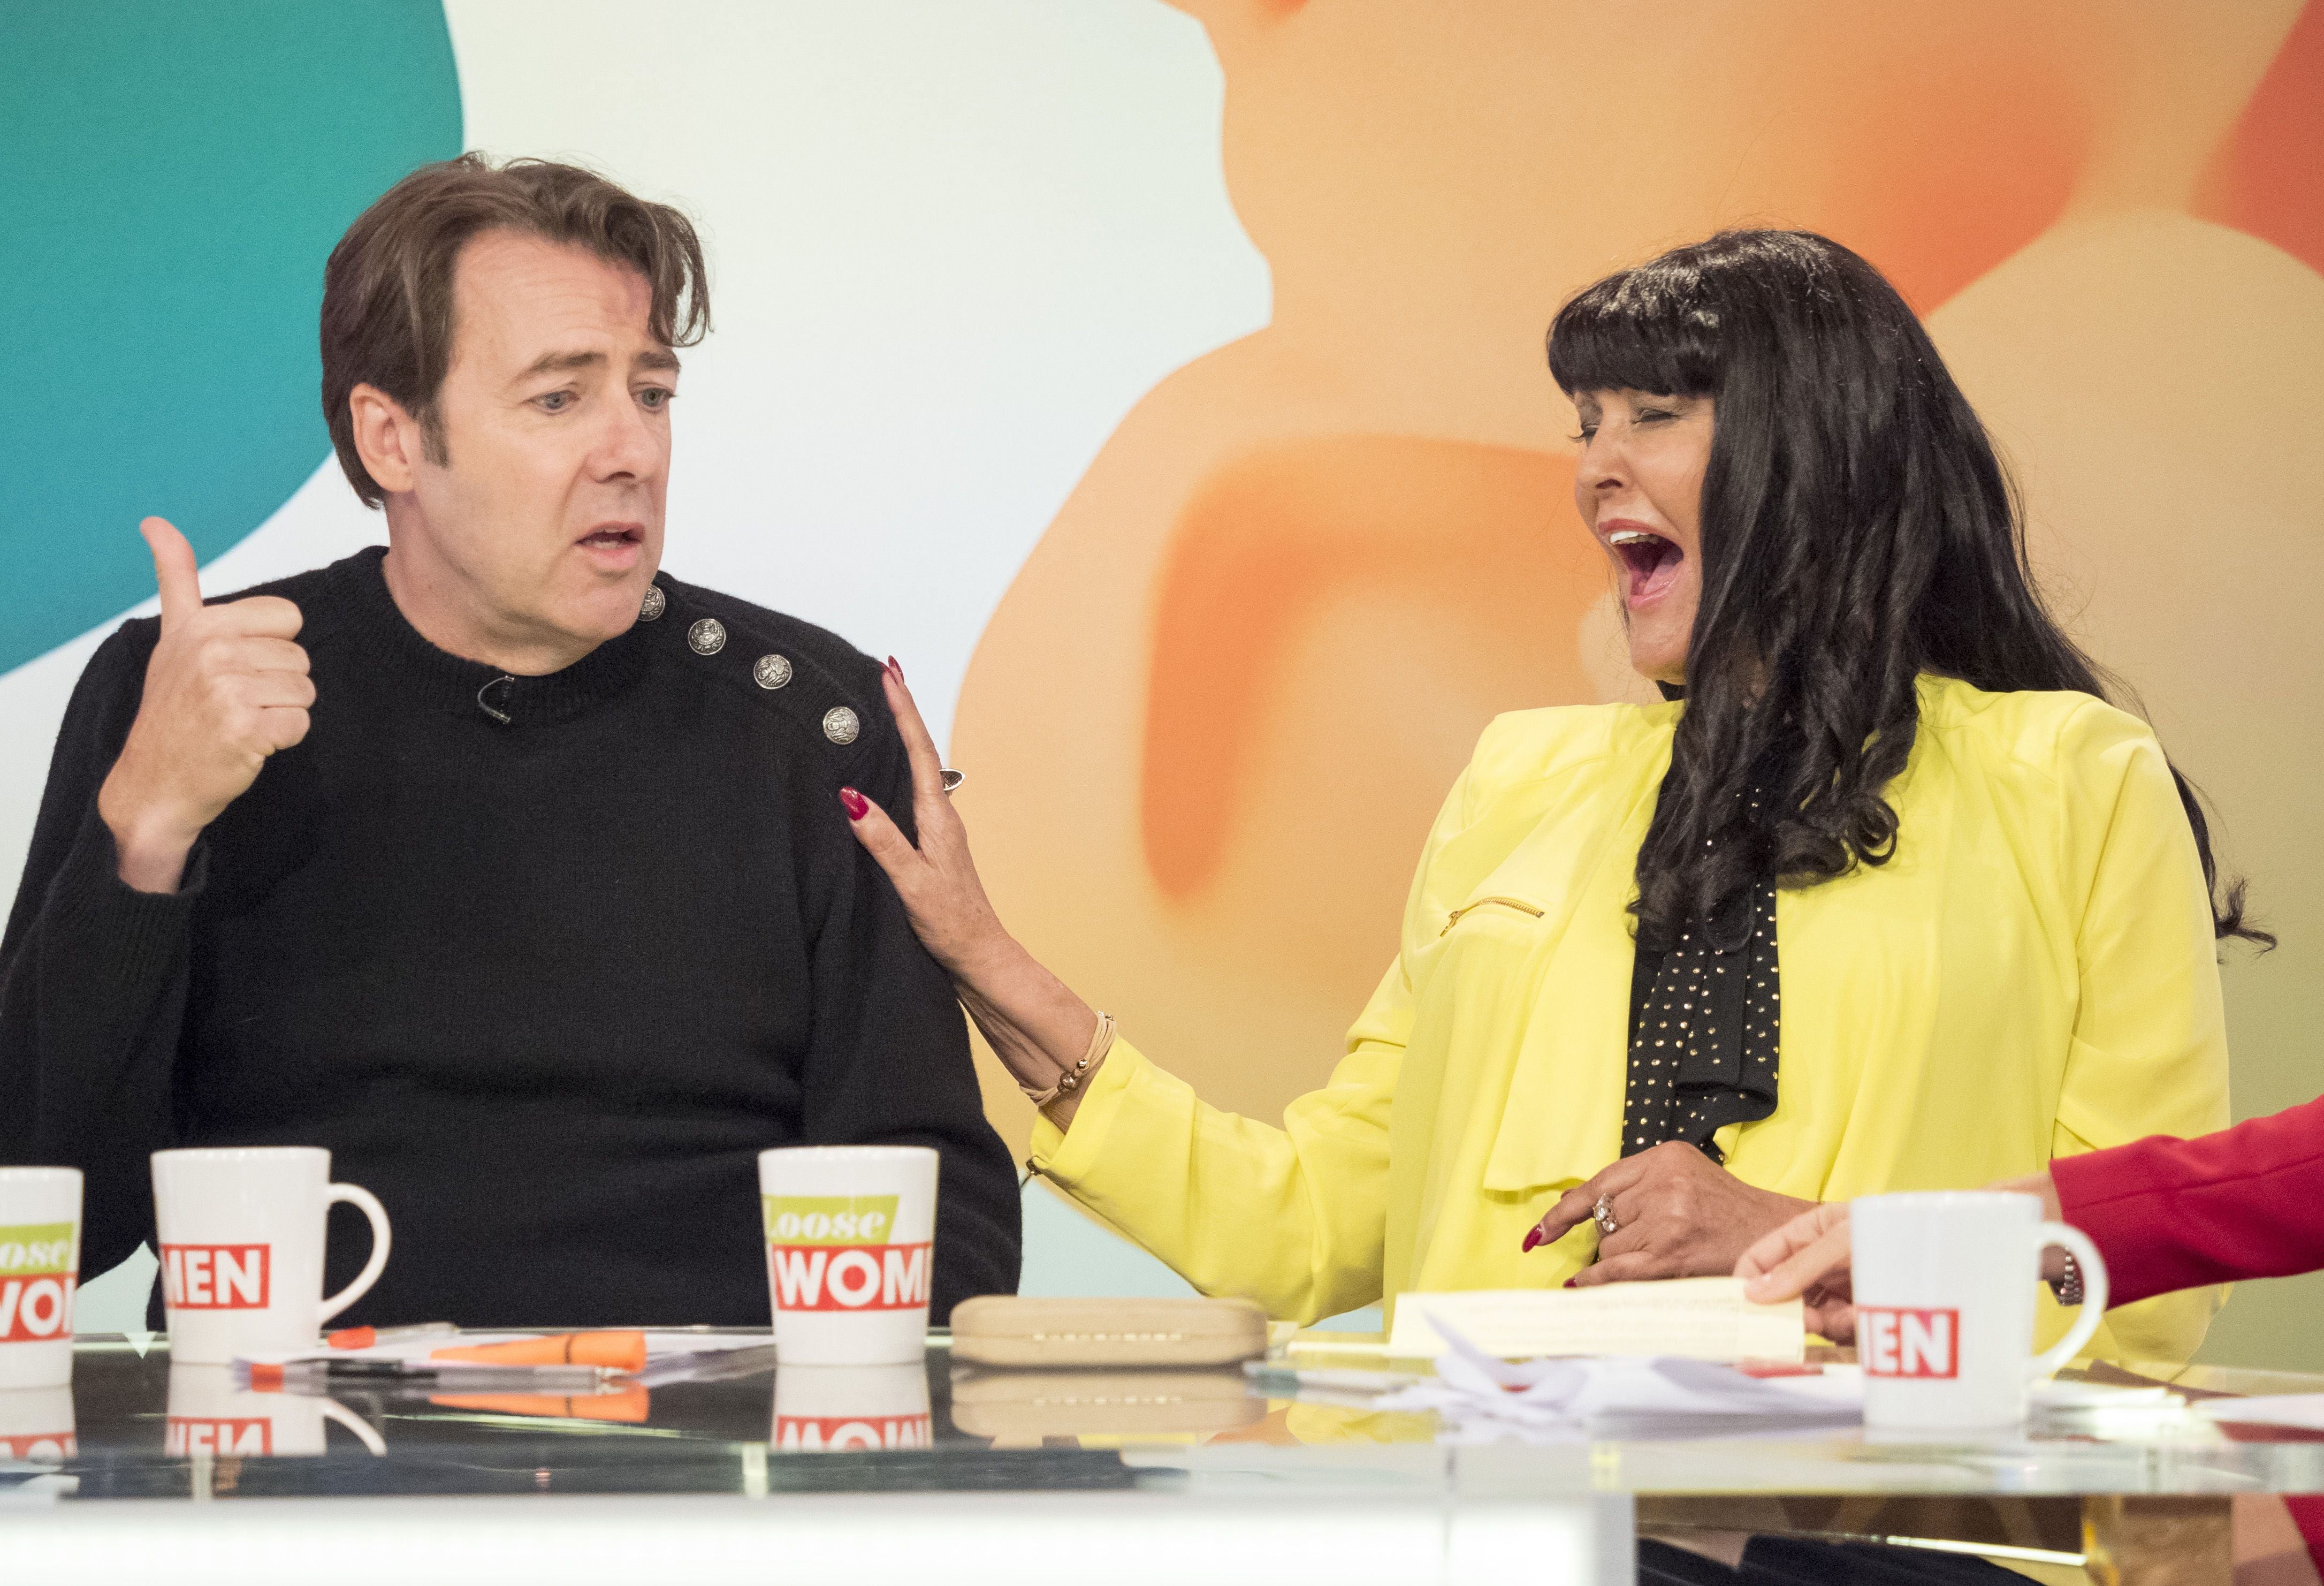 Jonathan Ross and Hilary Devey on ‘Loose Women’ in 2015